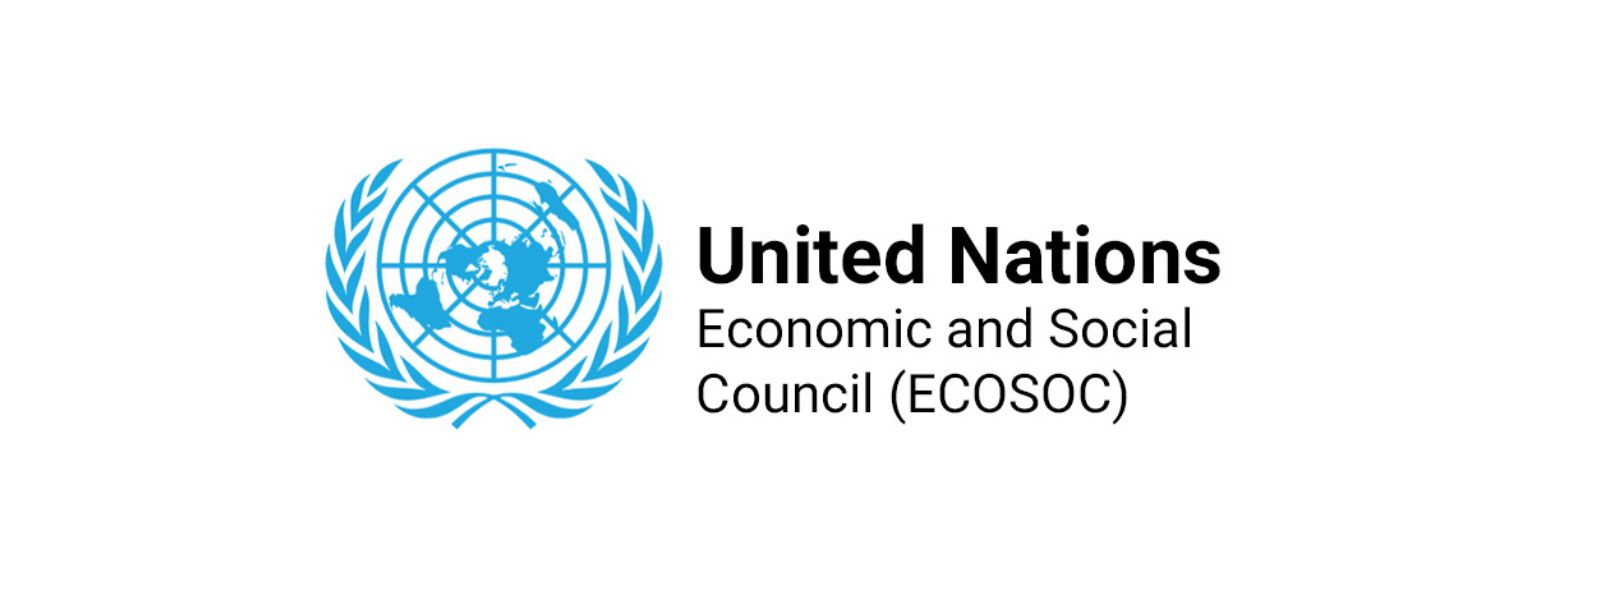 SL elected to the UN Economic and Social Council